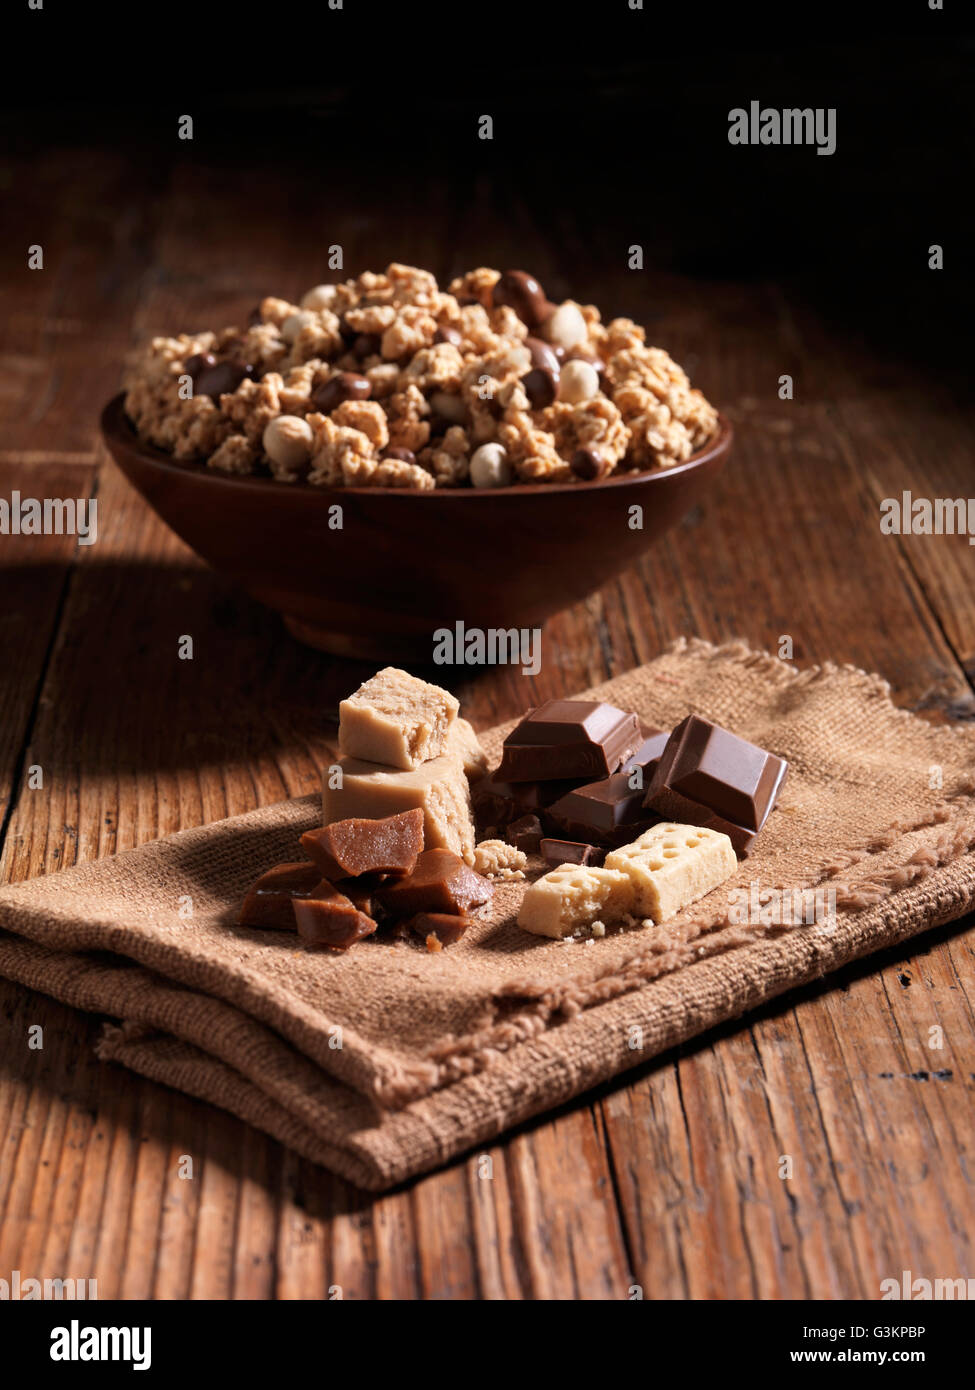 Millionaires caramel crunch in bowl with ingredients beside it Stock Photo